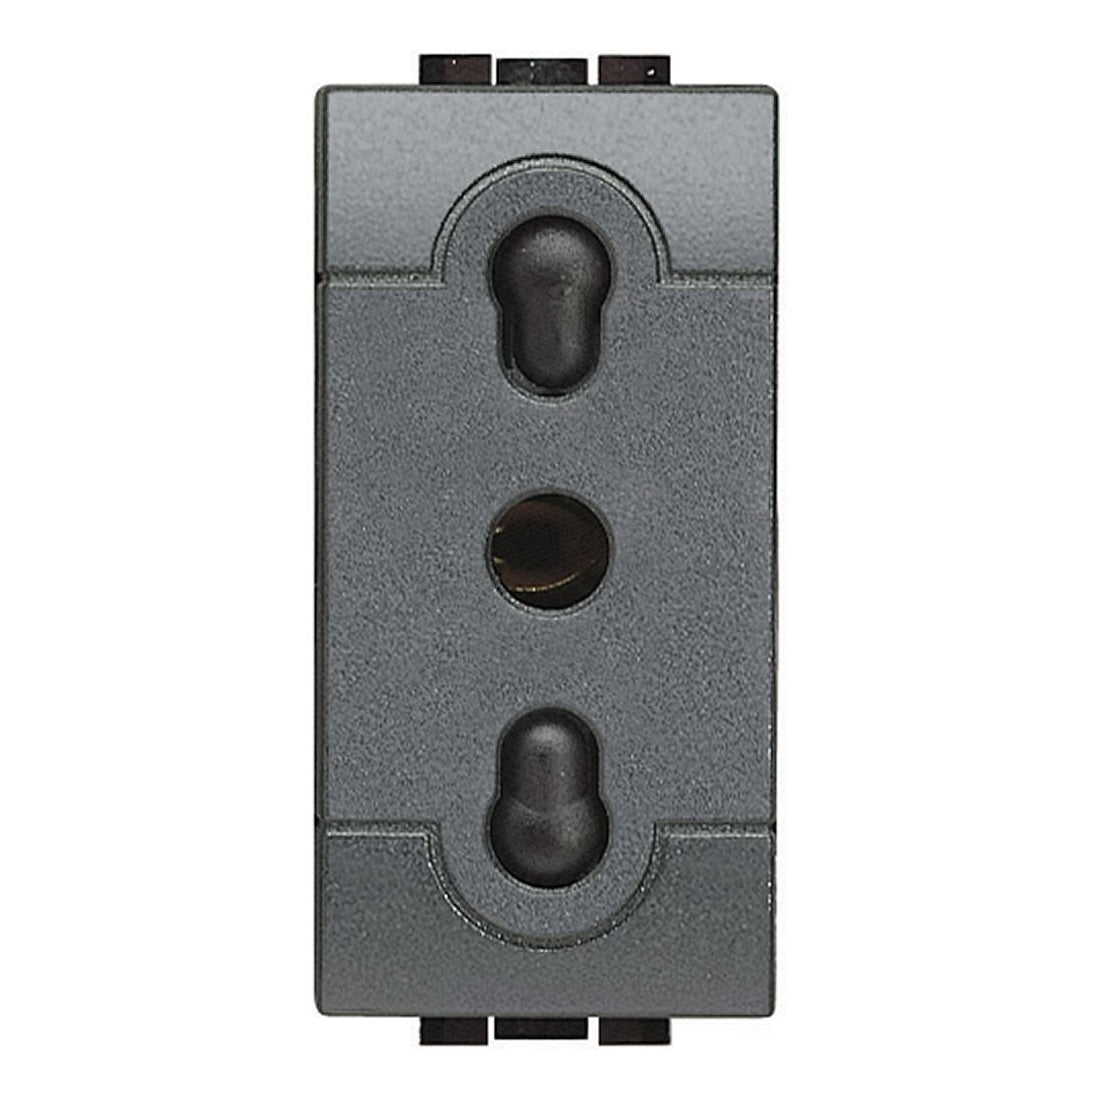 Bticino 2P+E 250 Vac bypass socket, 10/16A socket with protected sockets, 19mm and 26mm center distance, anthracite colour, living series